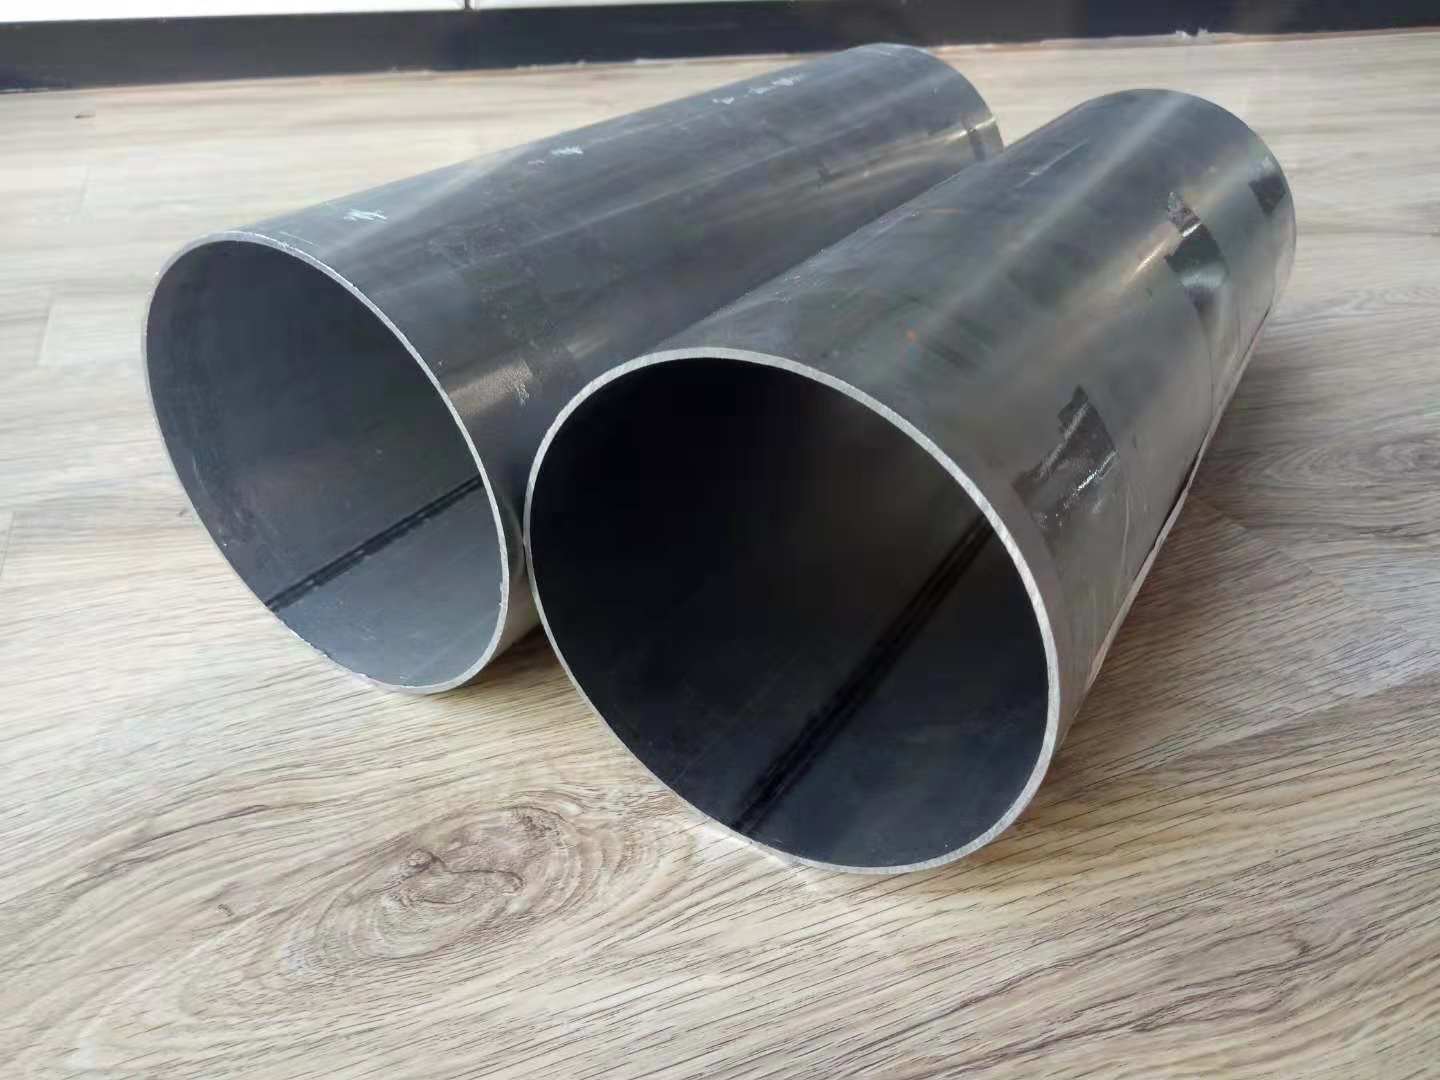 Exhaust pipes aluminized Steel Tube 